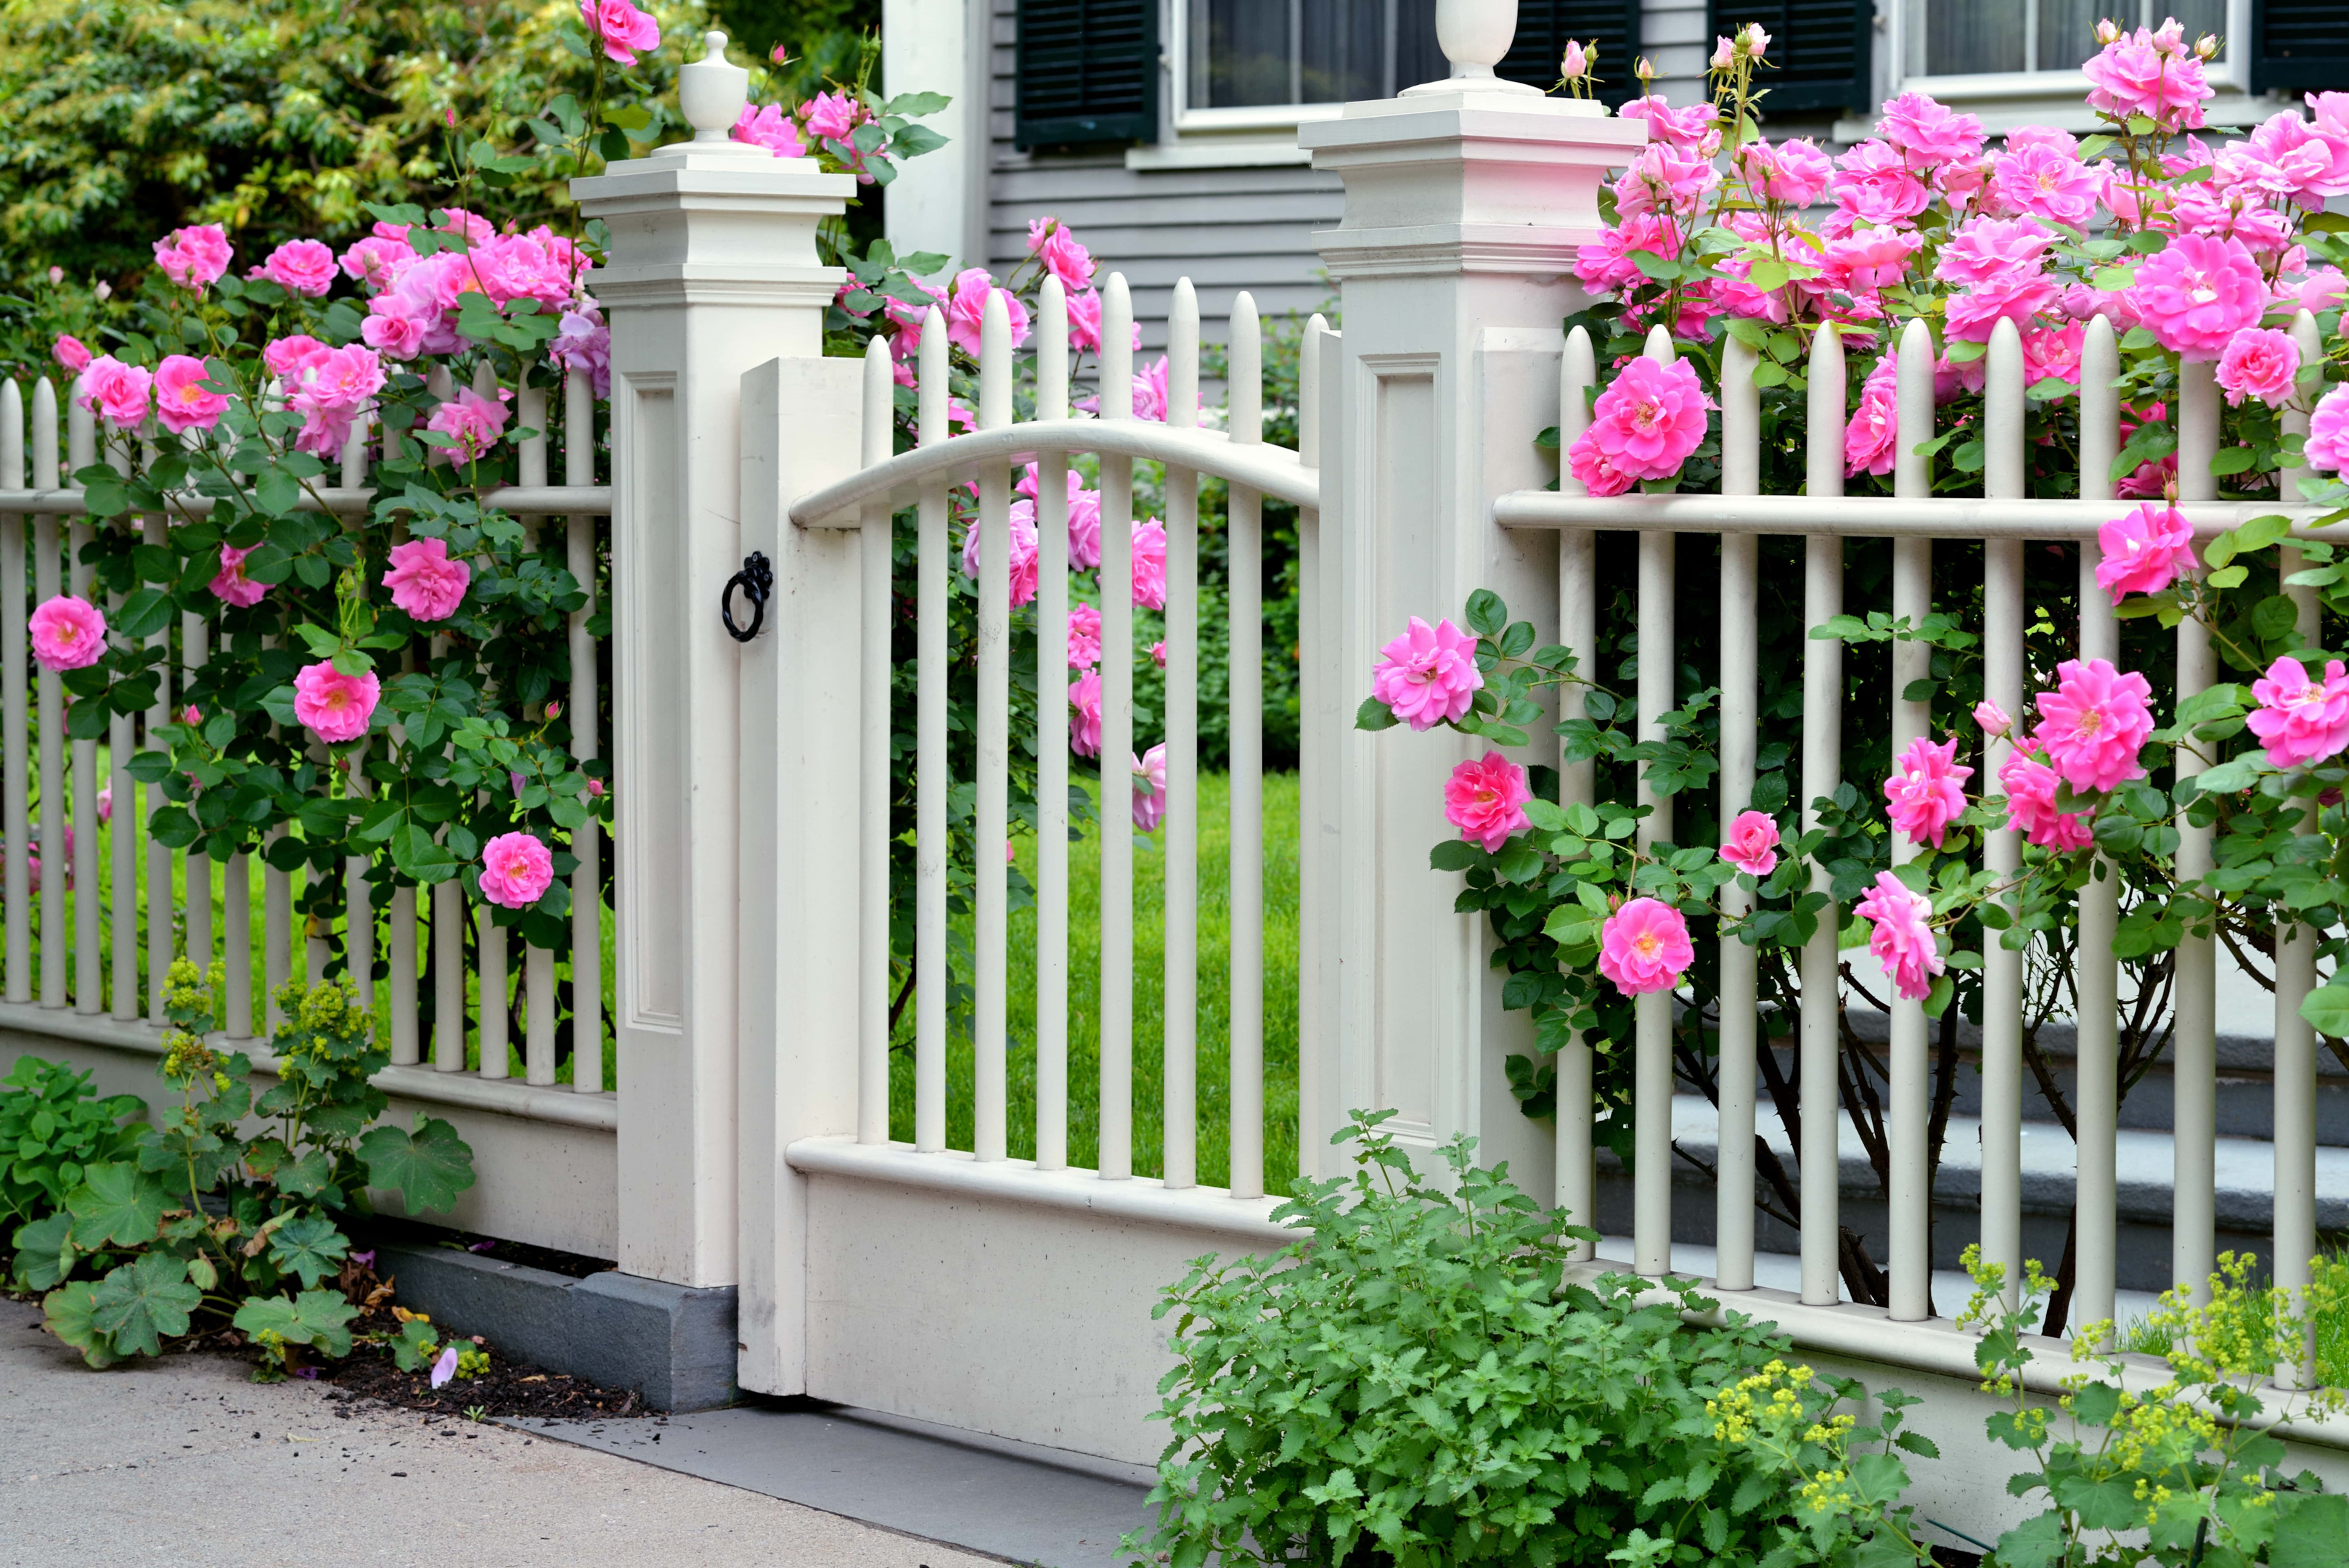 Rose garden grown over a white fence makes a statement 